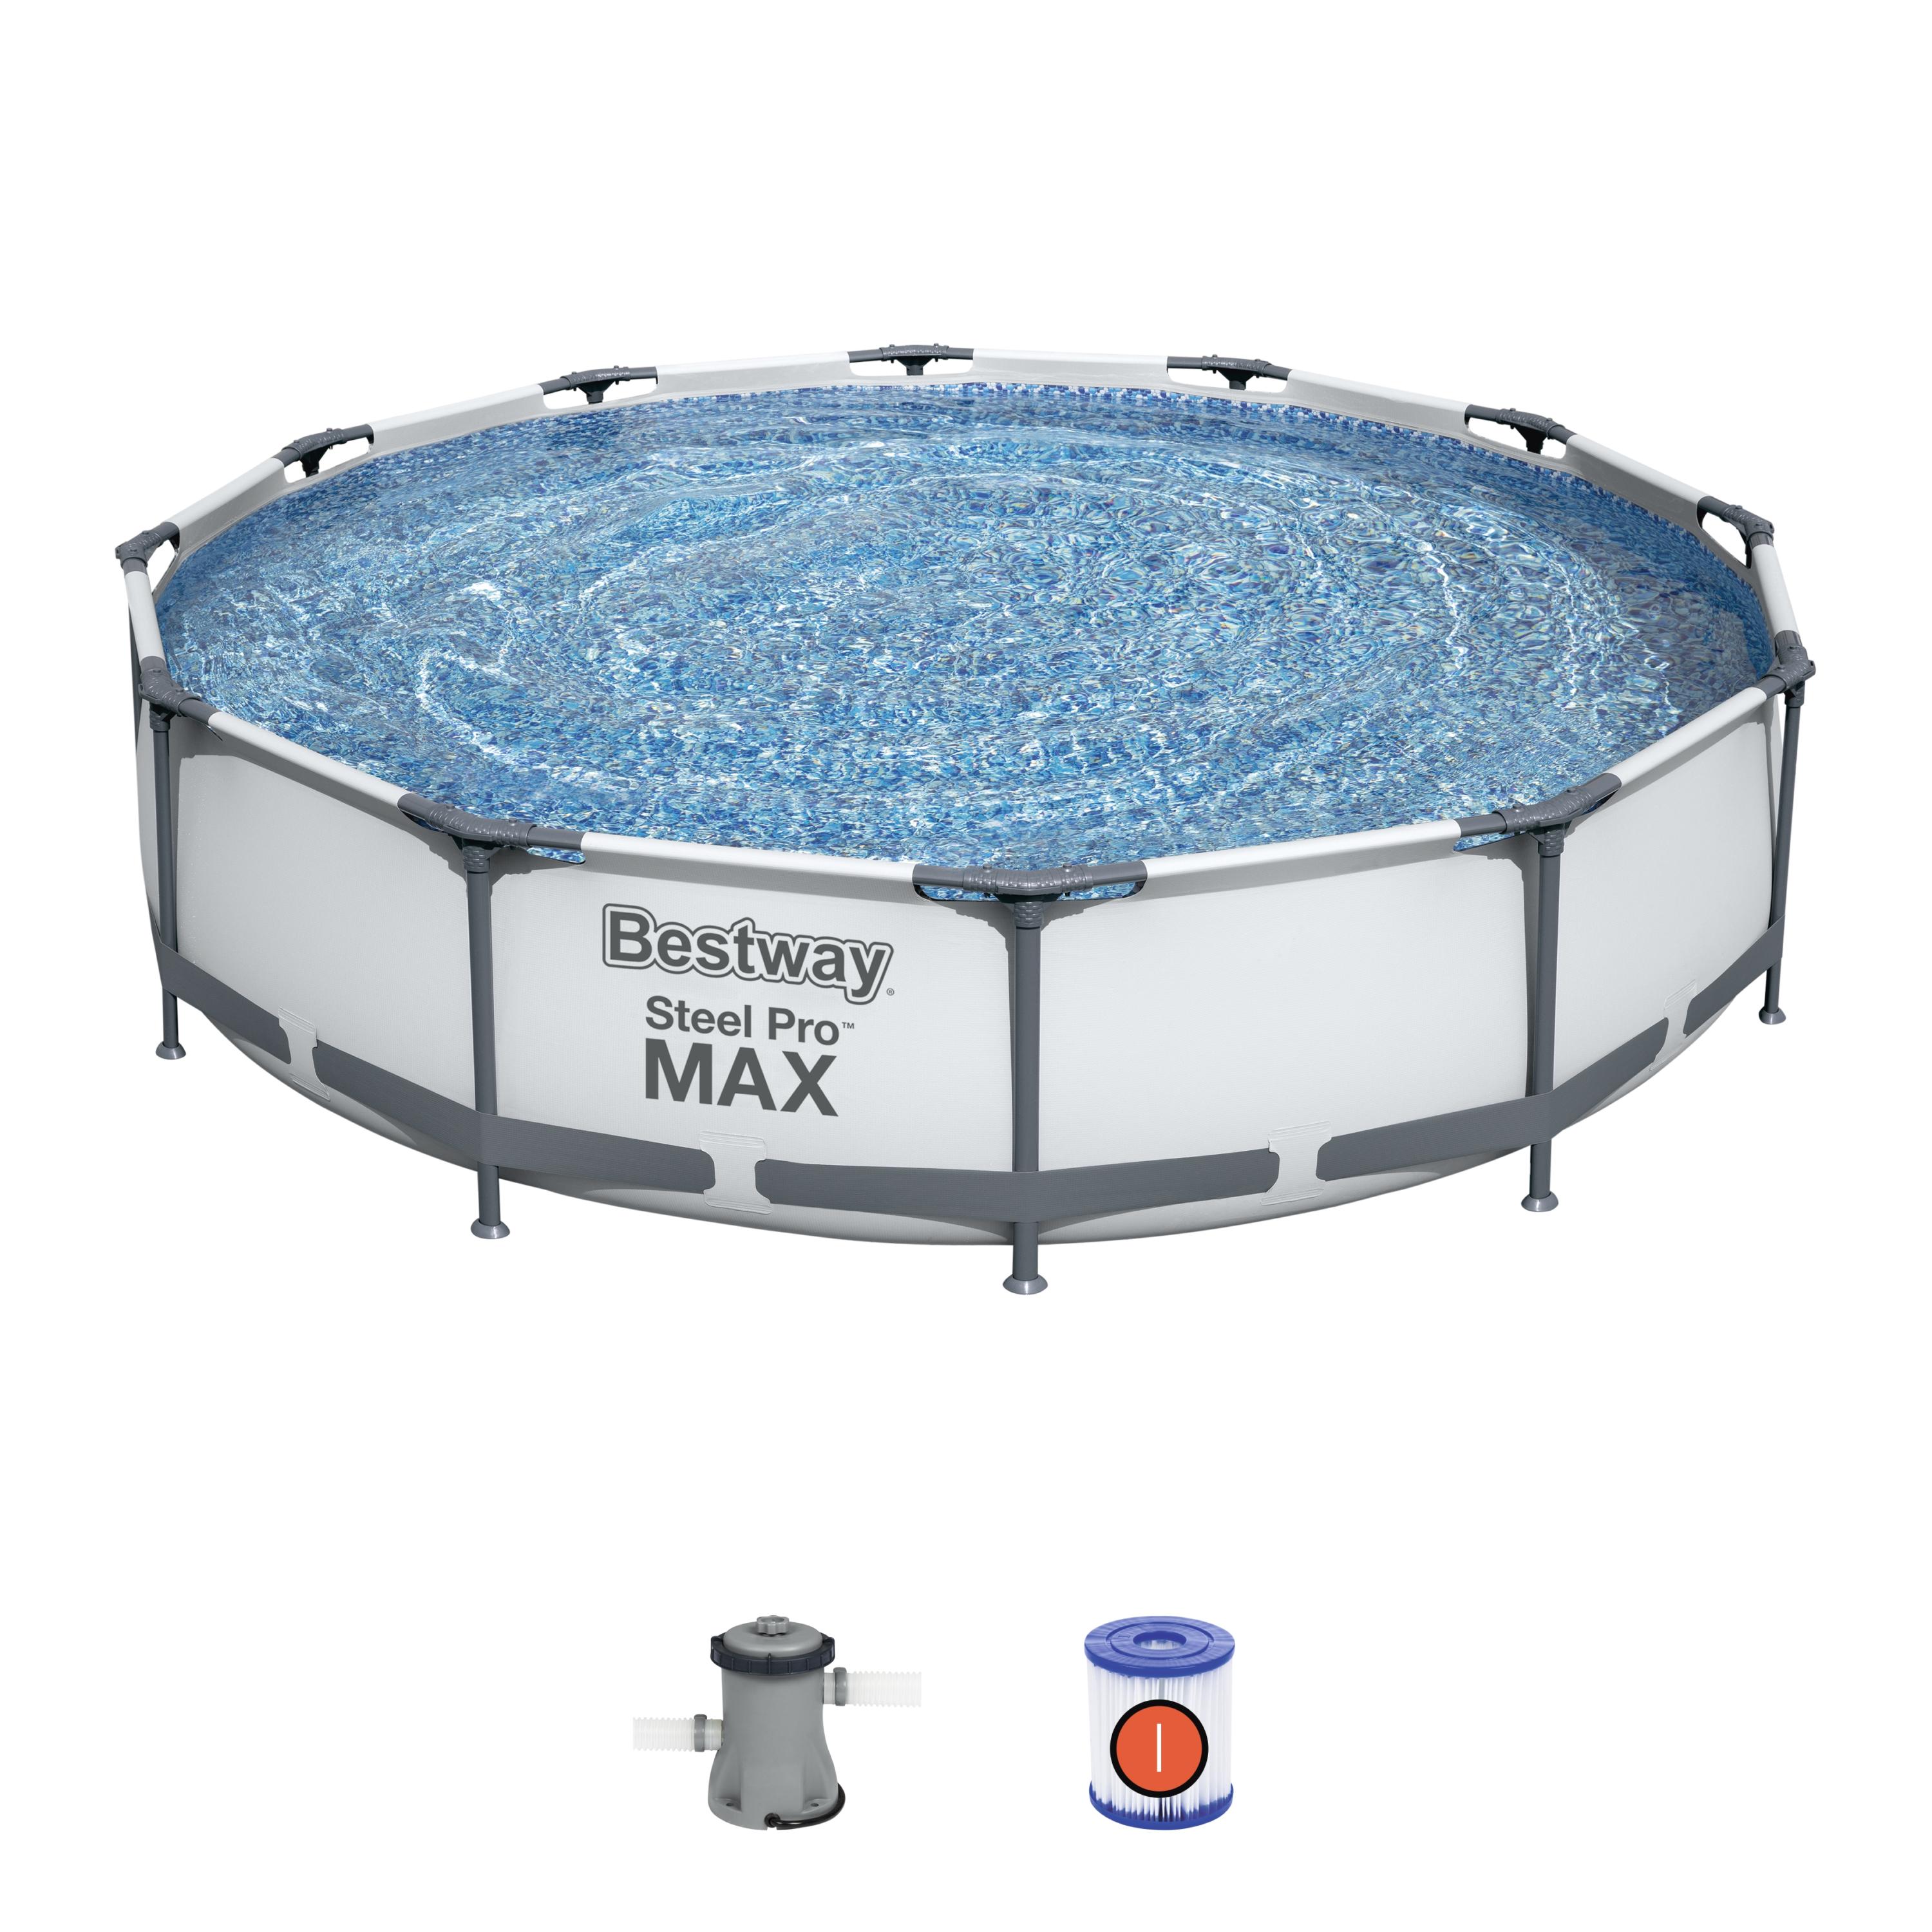 Bestway Steel Pro Max Swimming Pool Set with 330 GPH Filter Pump, 12' x 30" - image 4 of 9